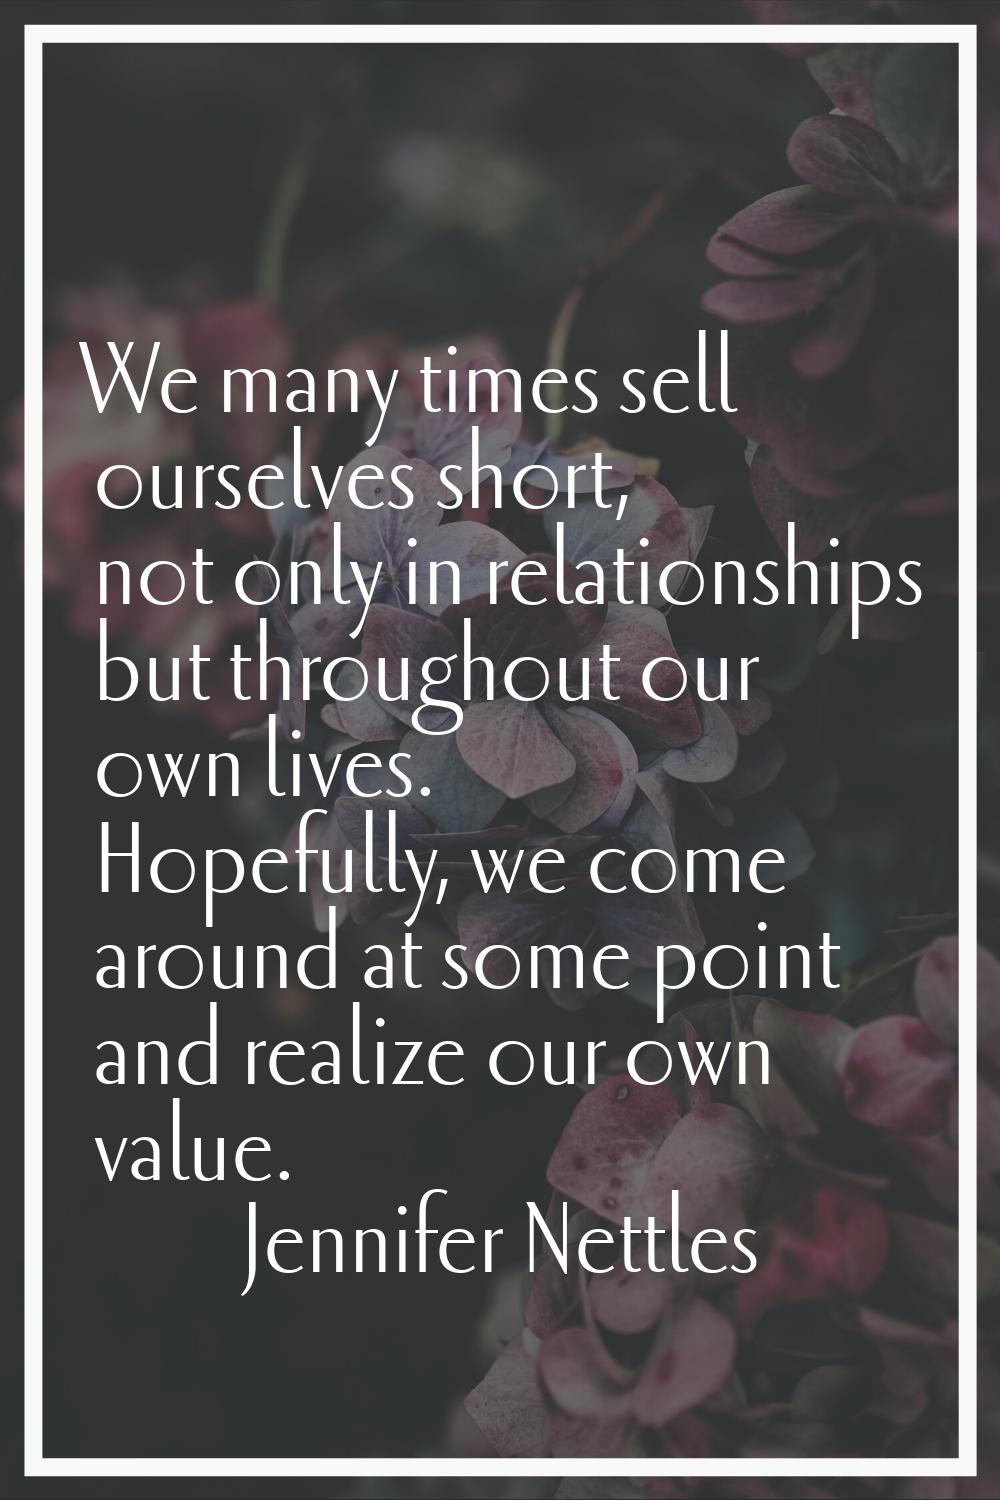 We many times sell ourselves short, not only in relationships but throughout our own lives. Hopeful